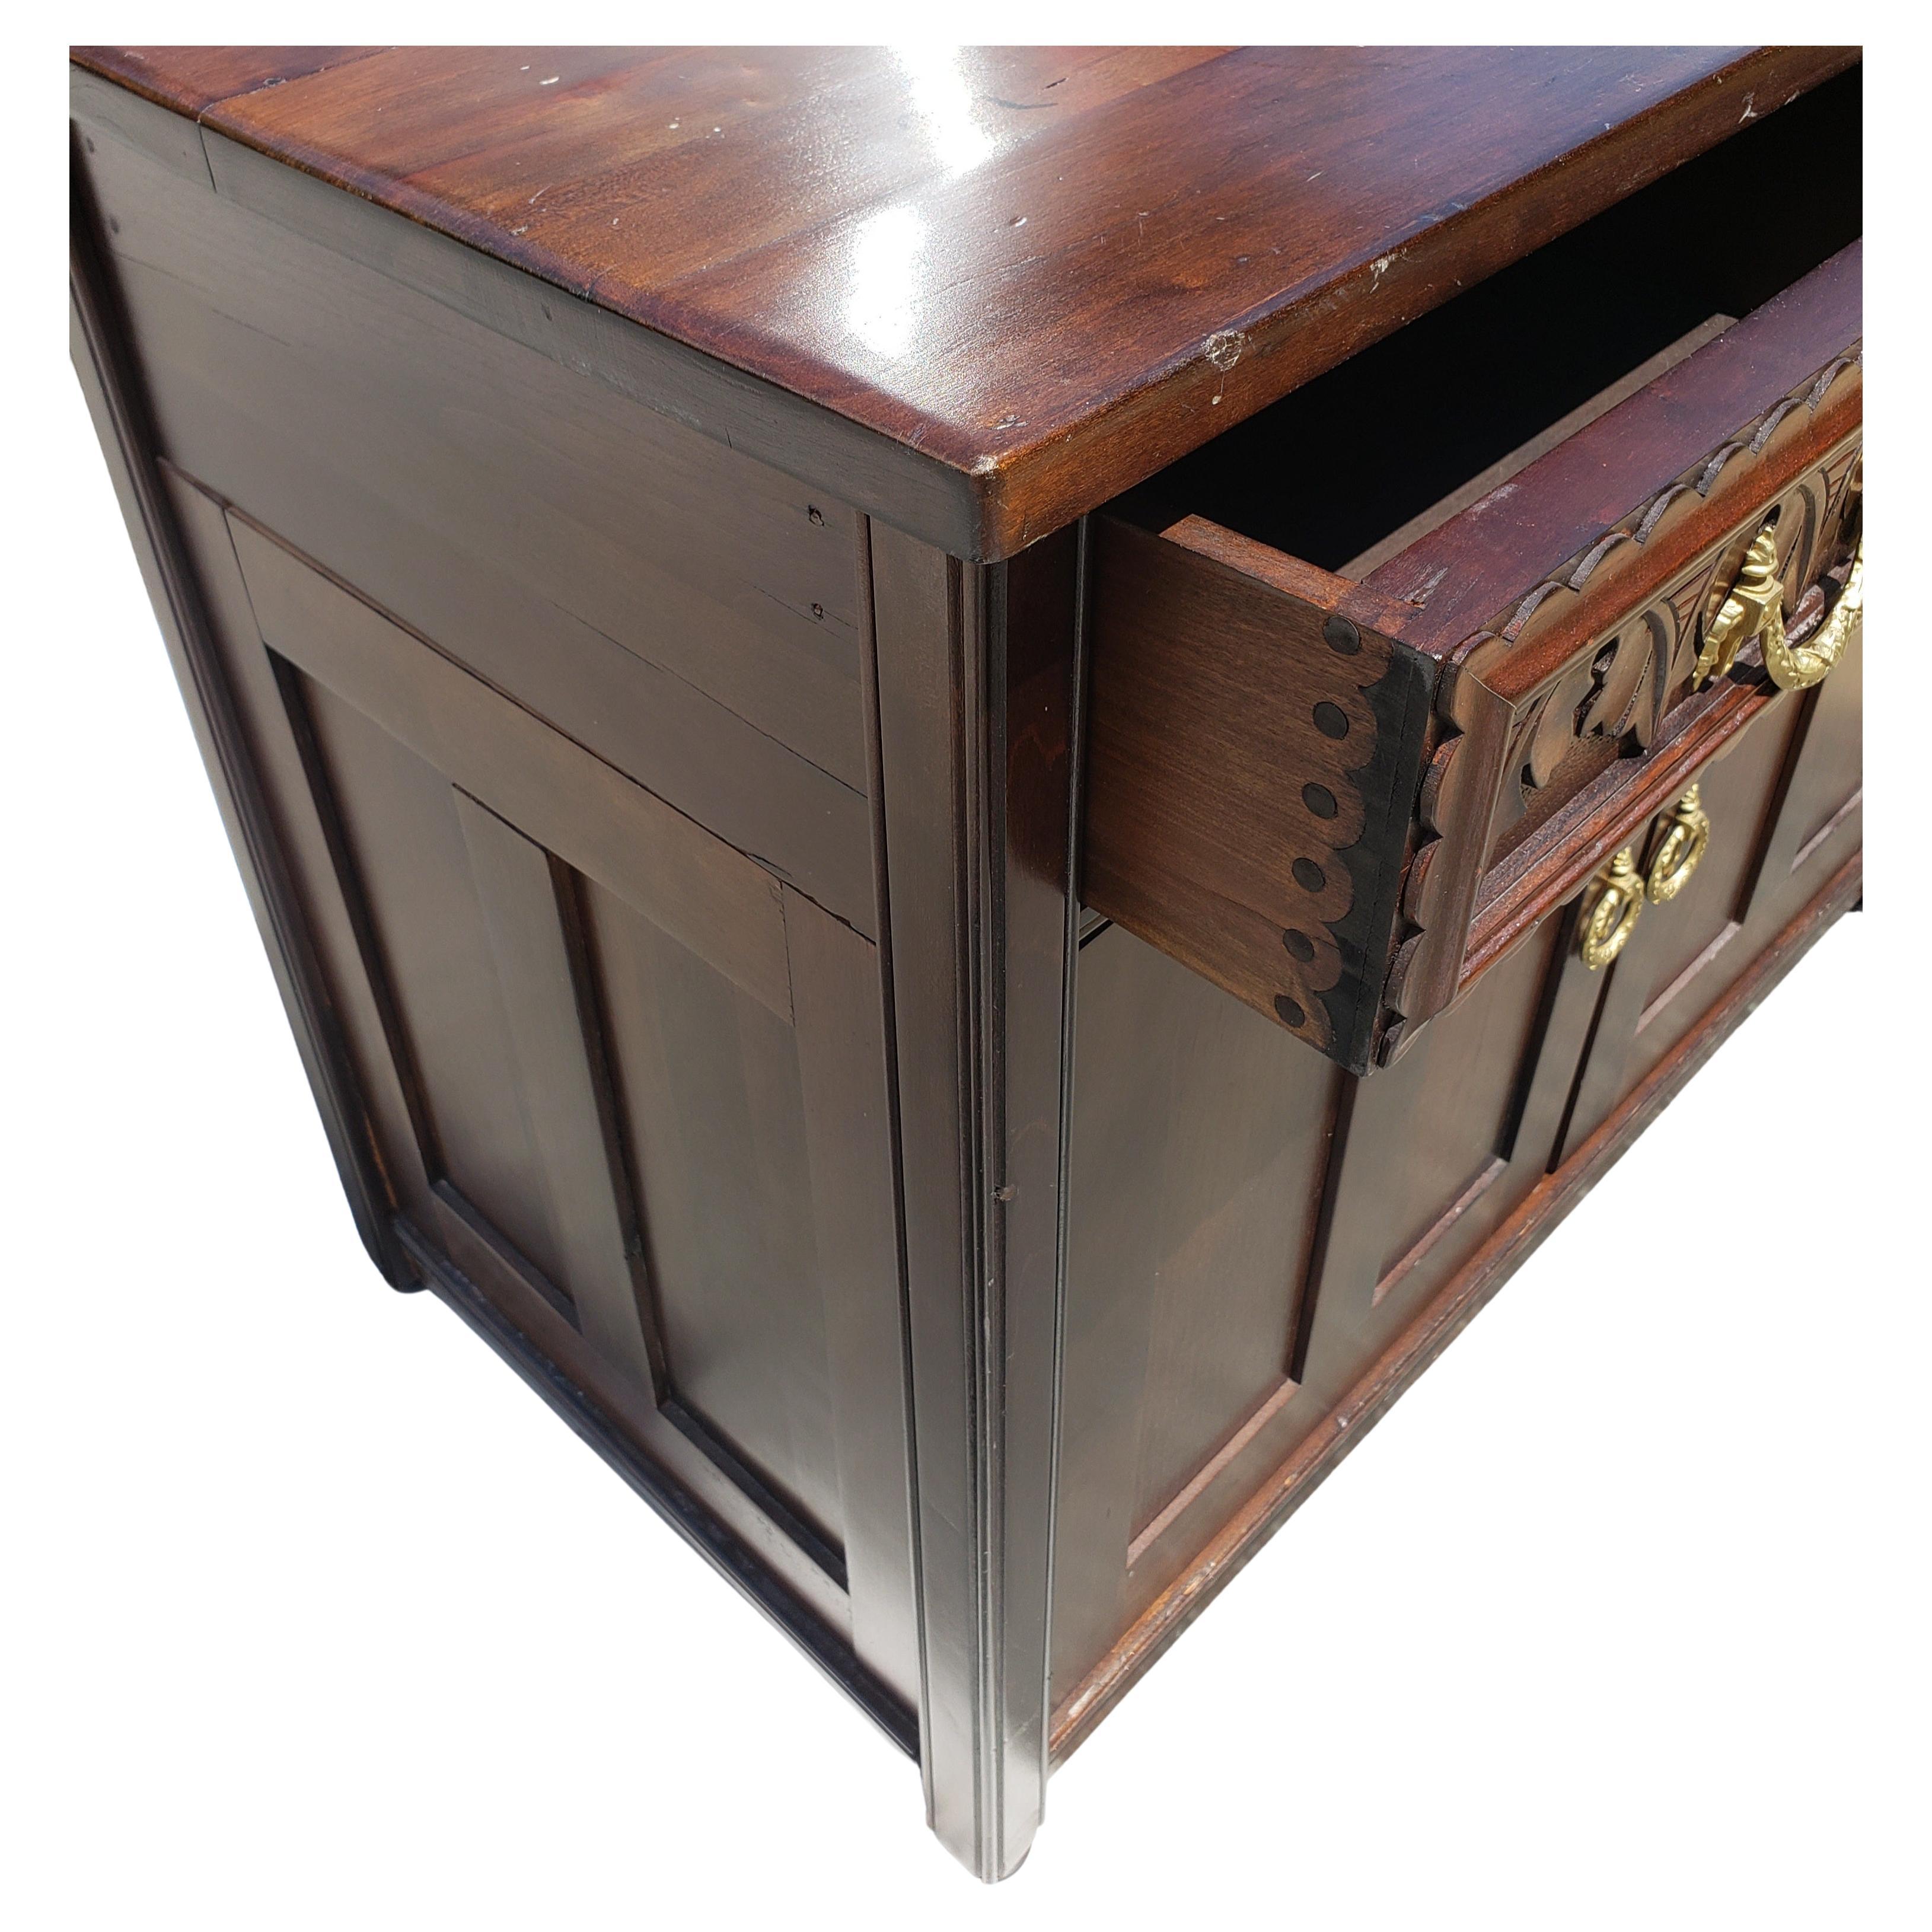 Absolutely beautiful American Empire Walnut credenza server cabinet with two drawer with exquisitely handcarved front.
This beautiful piece may be used in any dining area in your home.
It is in good condition and has been refinished. Shows aged